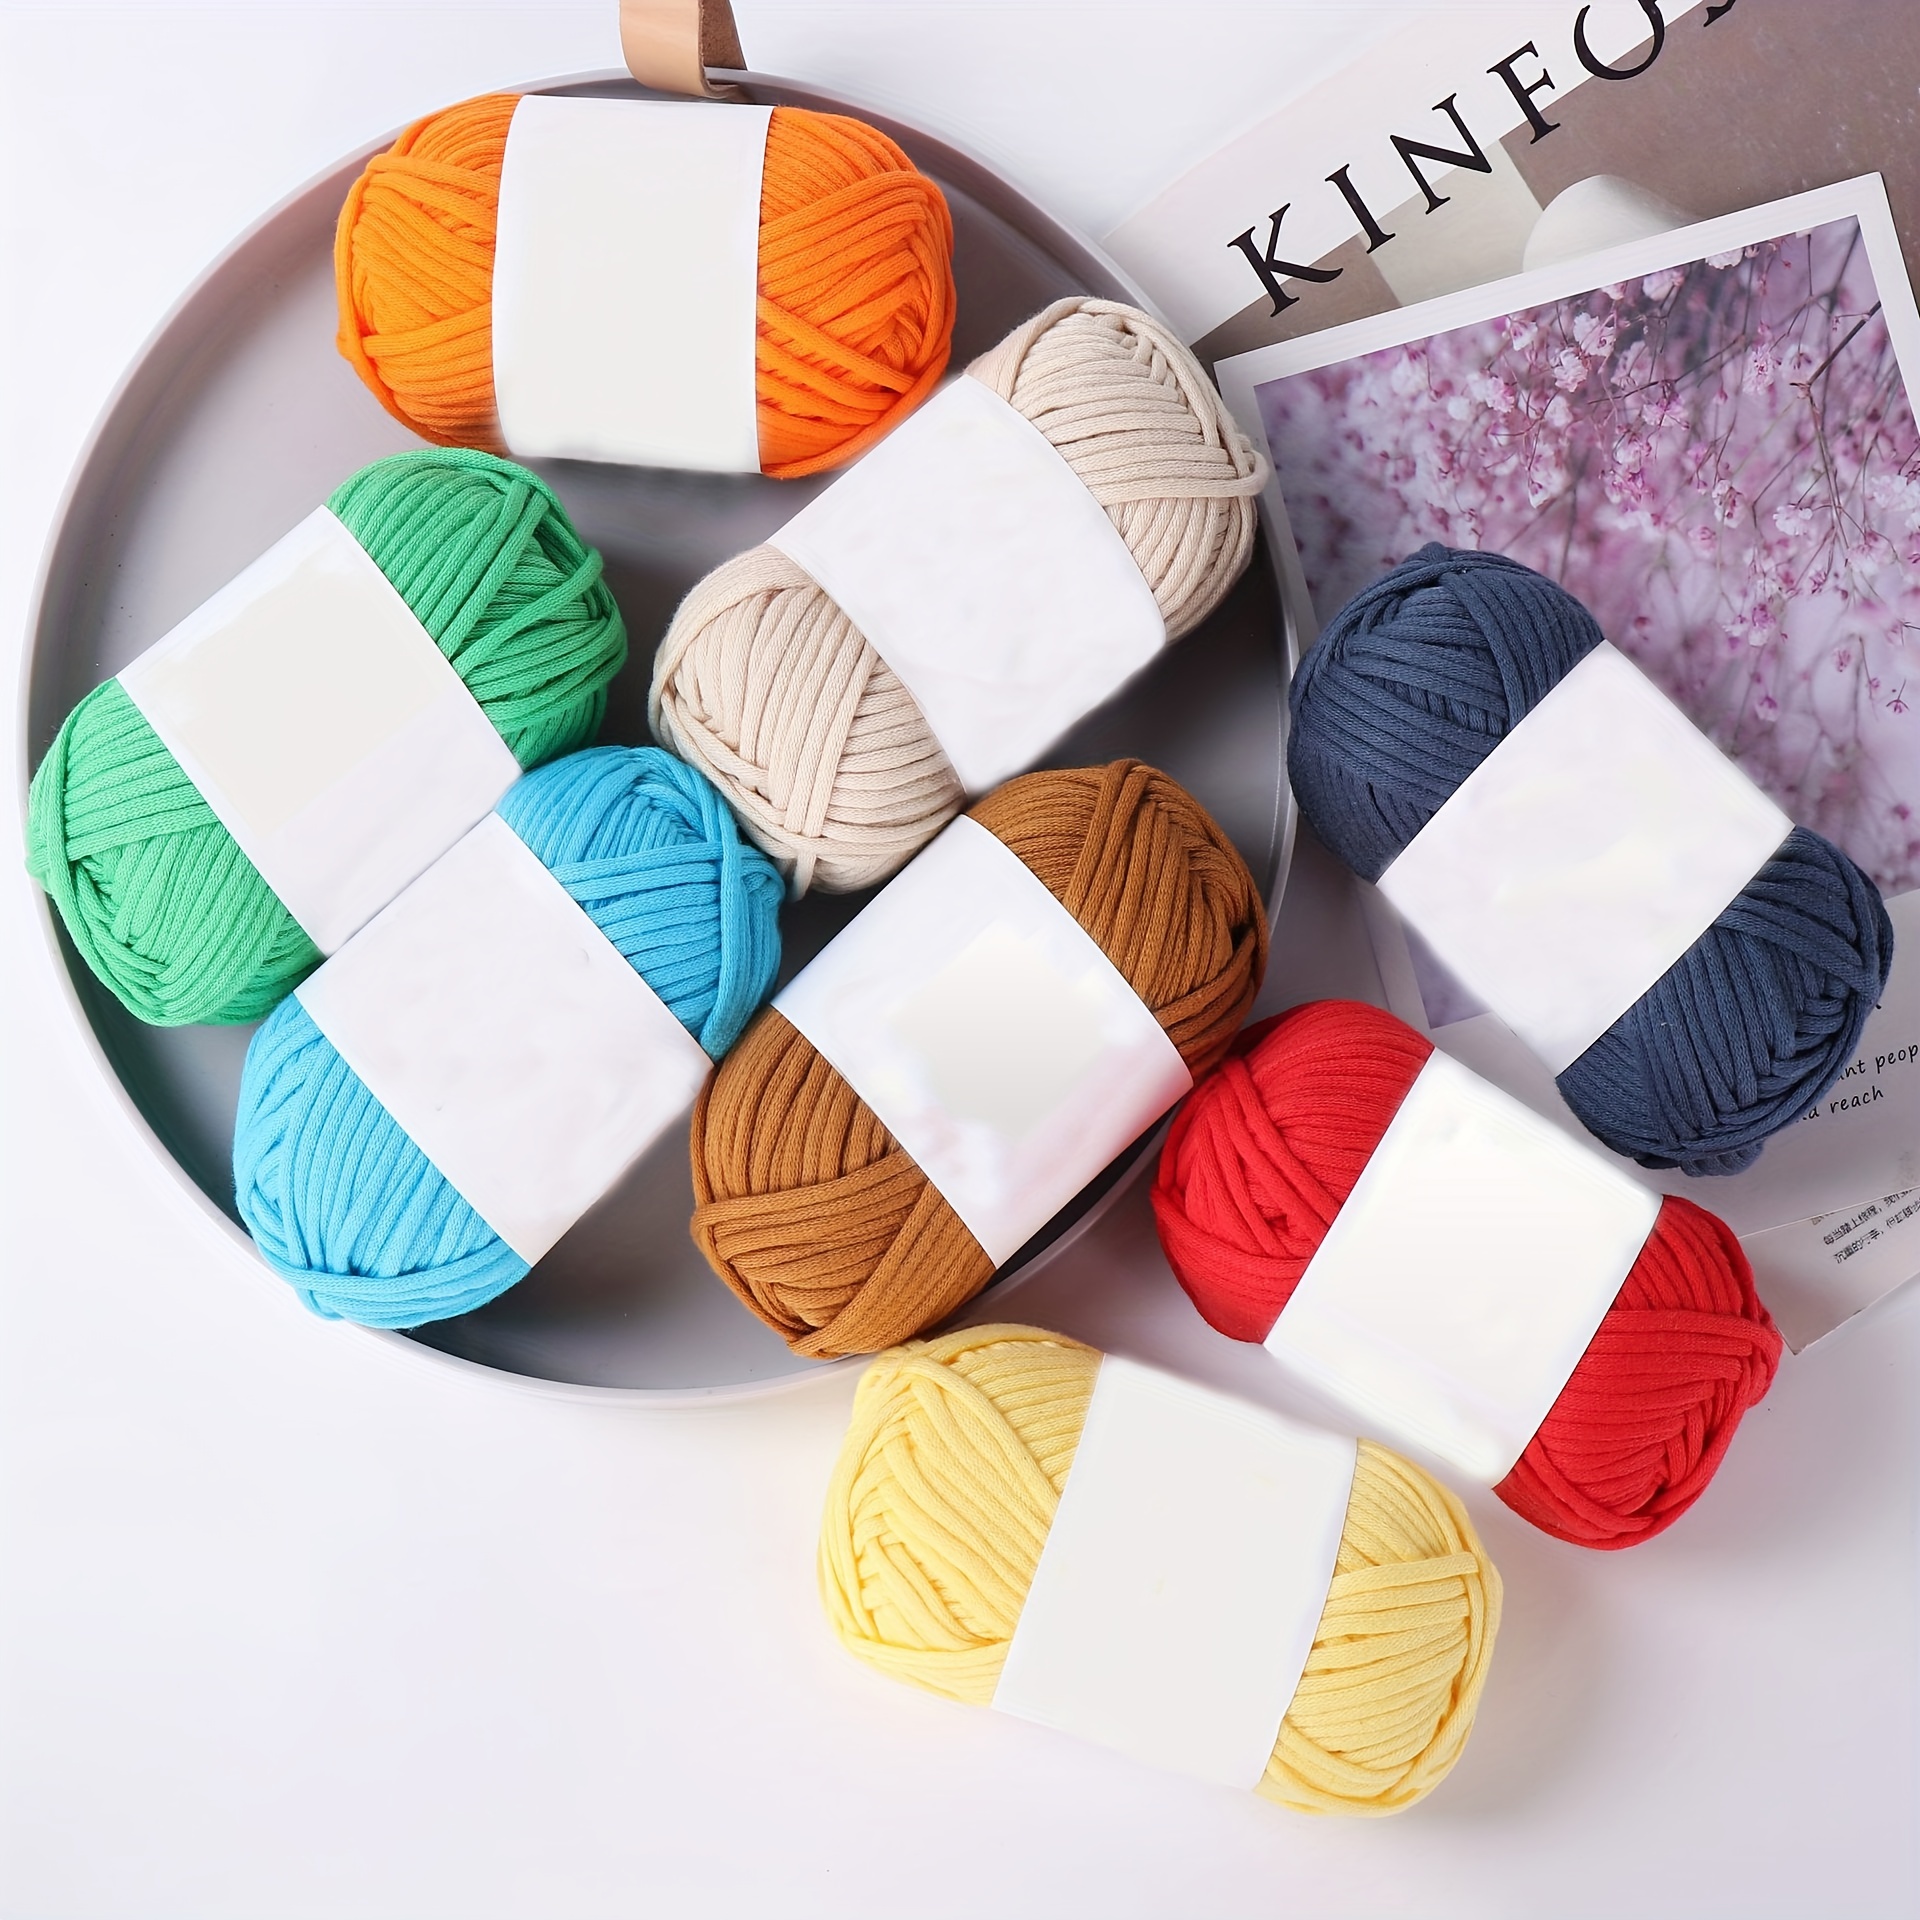 What Can I Knit With Cotton Yarn? (30 Ideas)